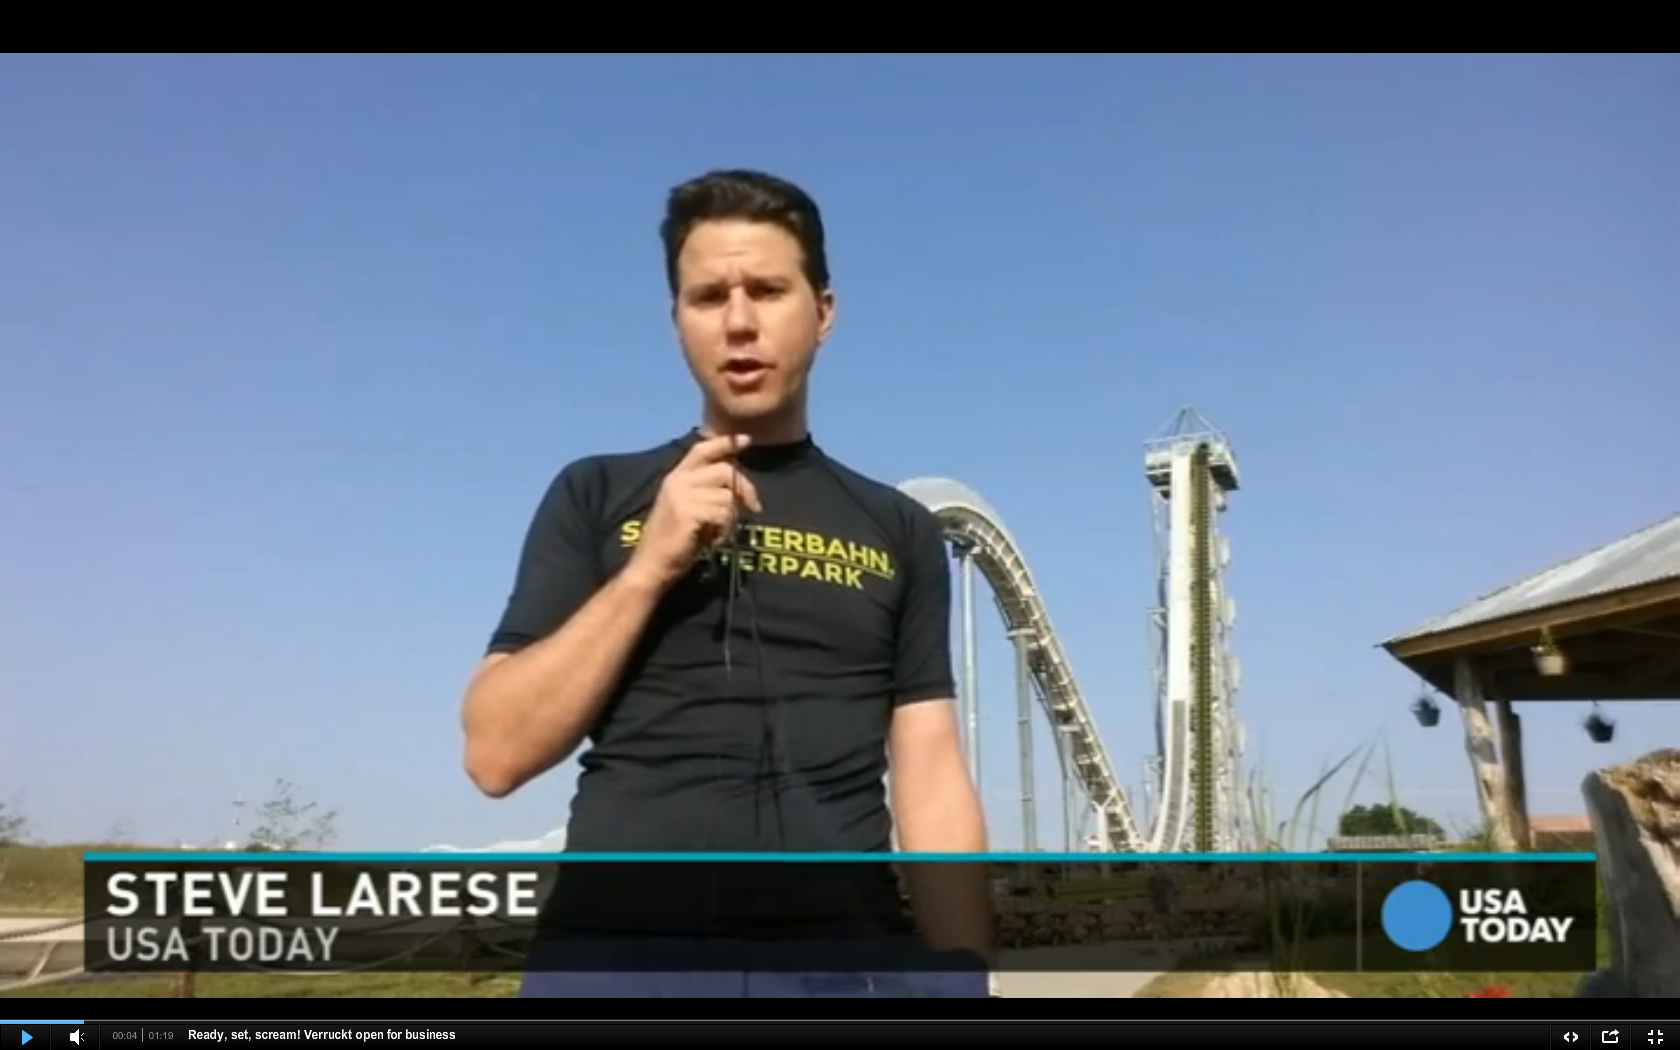 Steve Larese reporting on the opening of the world's largest water slide, Verruckt, for USA Today Travel.